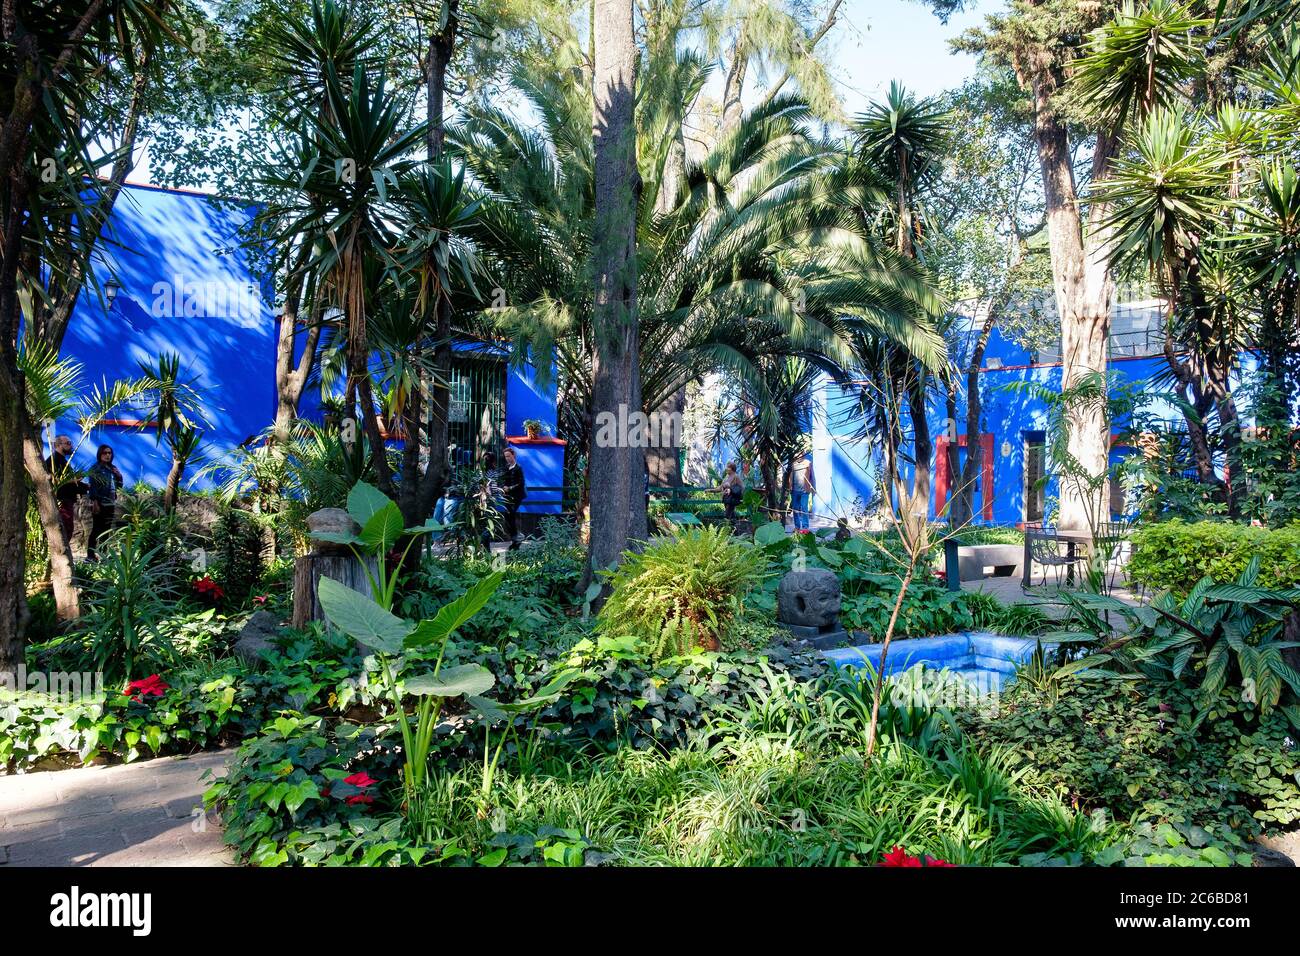 Garden and courtyard at the Frida Kahlo Museum known as the Blue House  at Coyoacan in Mexico City Stock Photo